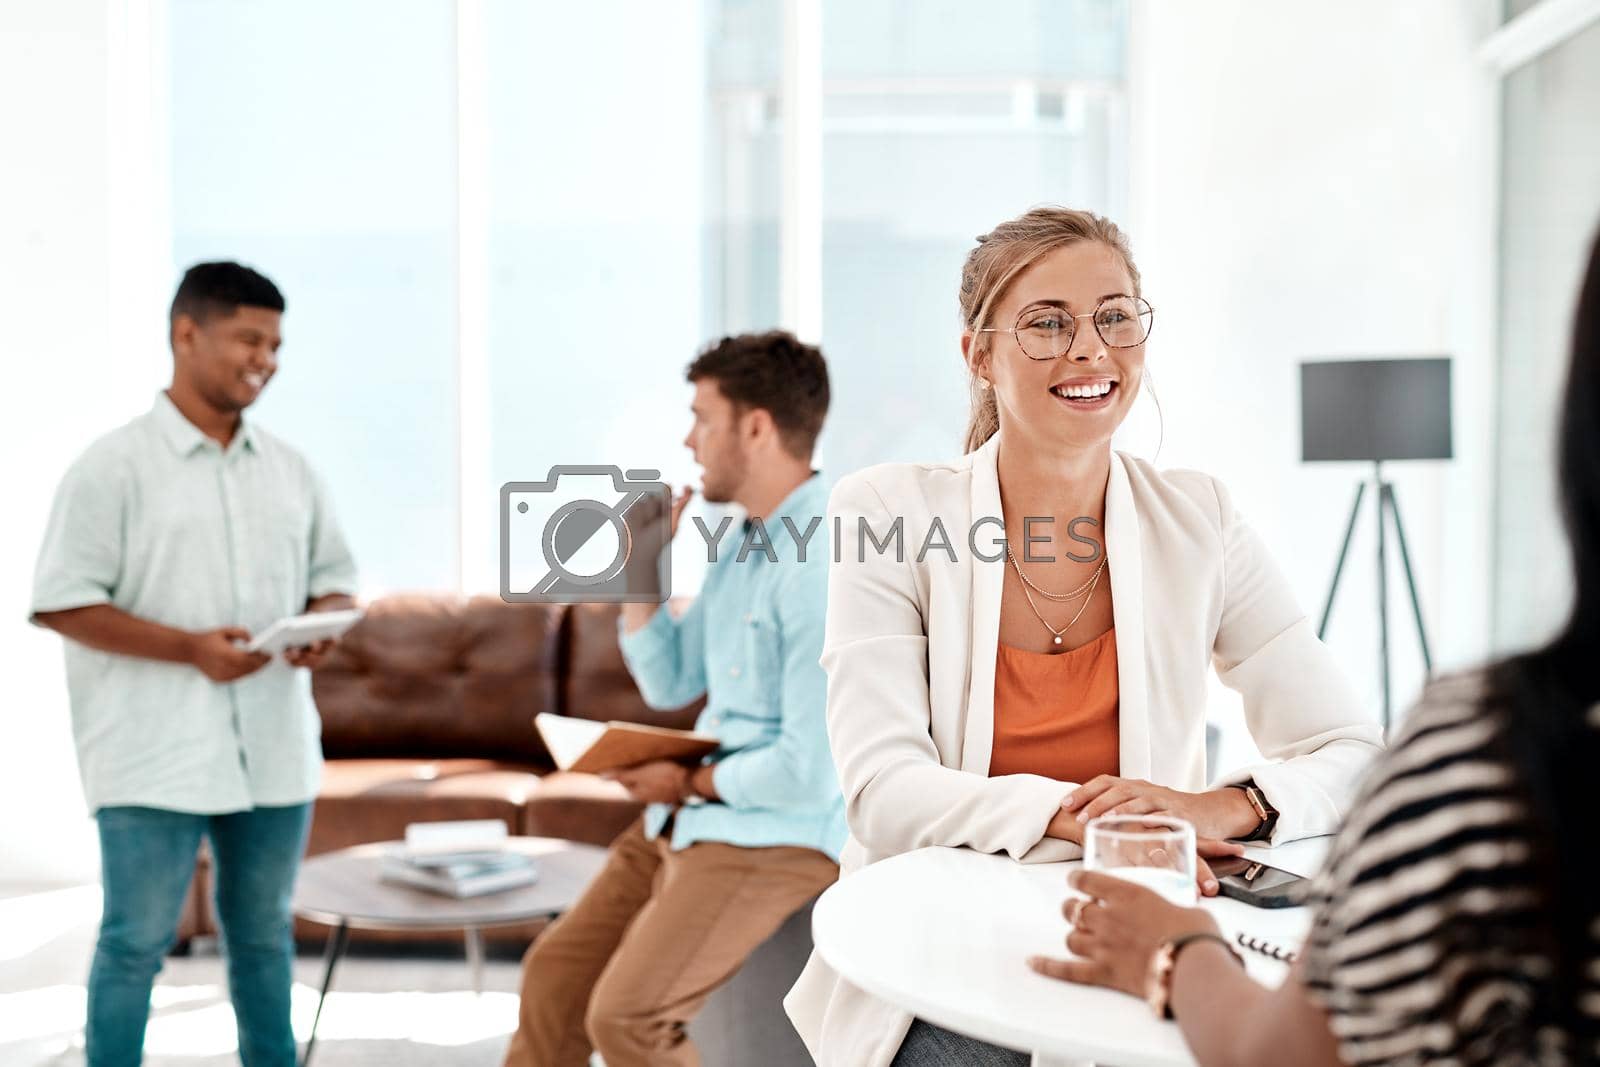 Royalty free image of Its an awesome work environment. Cropped shot of a group of young businesspeople socializing in their office. by YuriArcurs